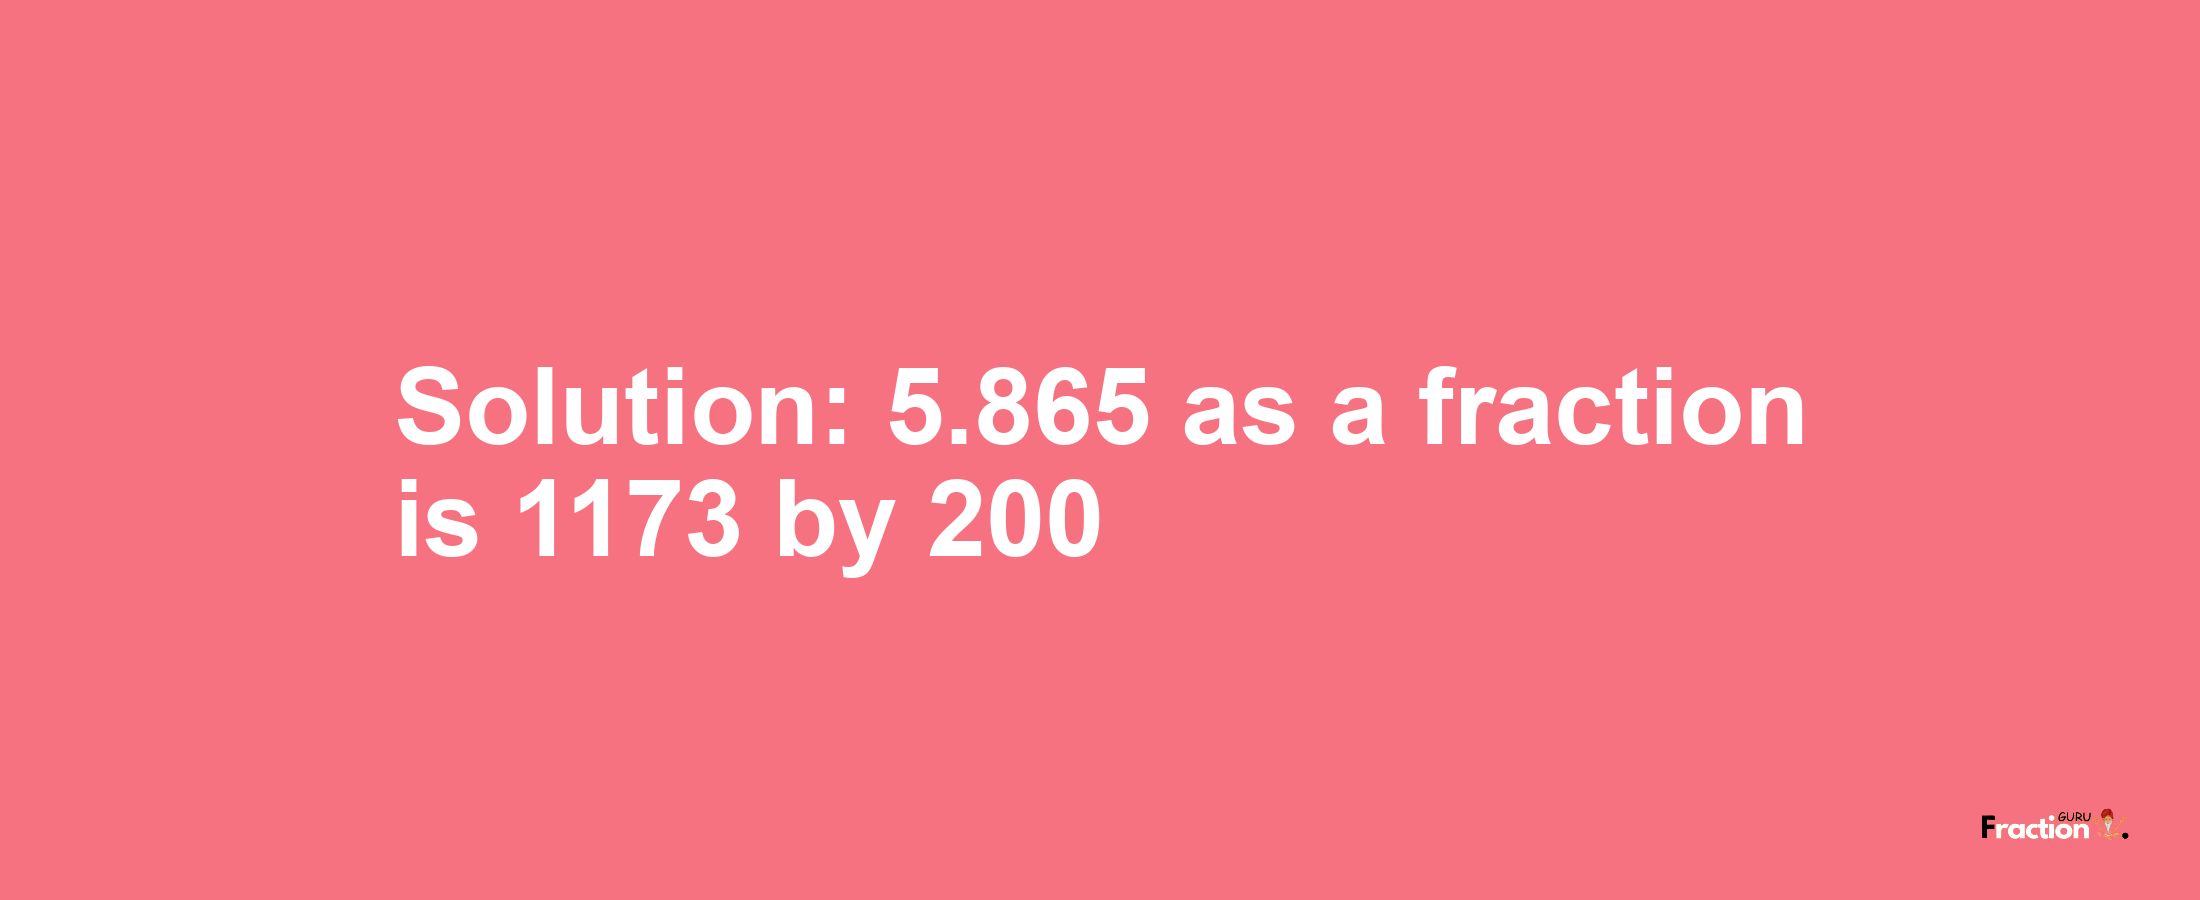 Solution:5.865 as a fraction is 1173/200